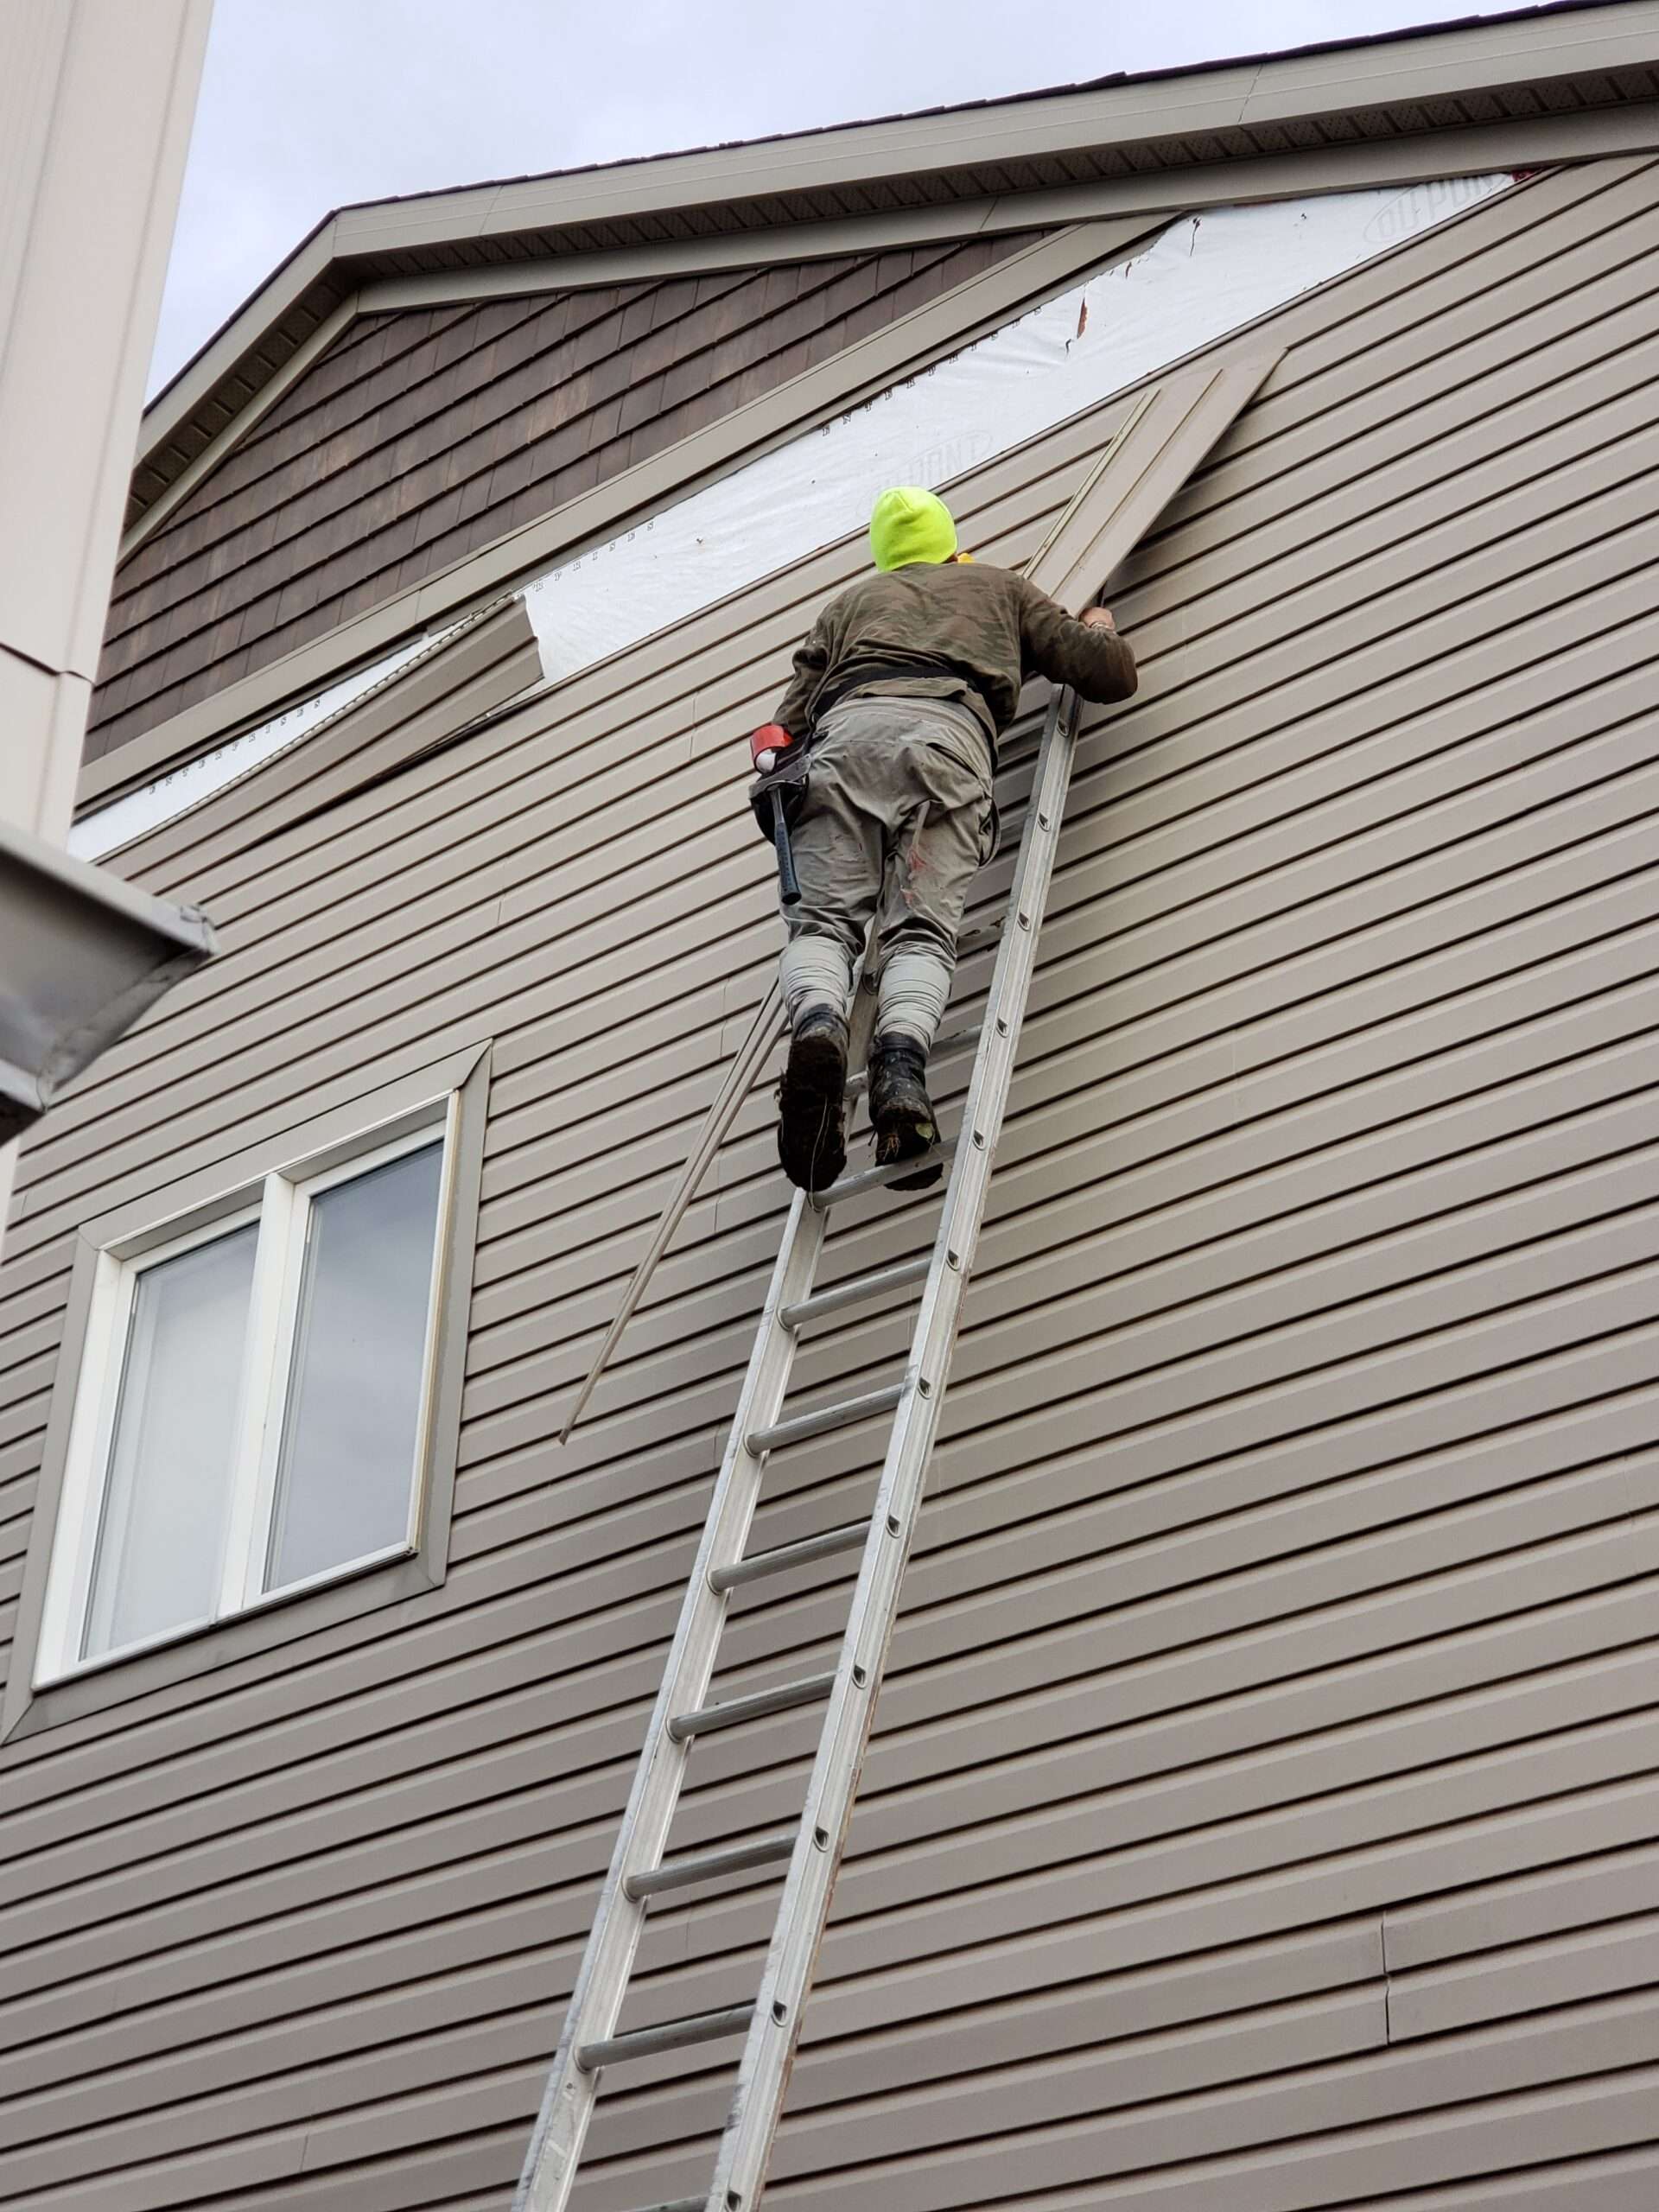 Looking for Siding services in Mountain Lakes, NJ